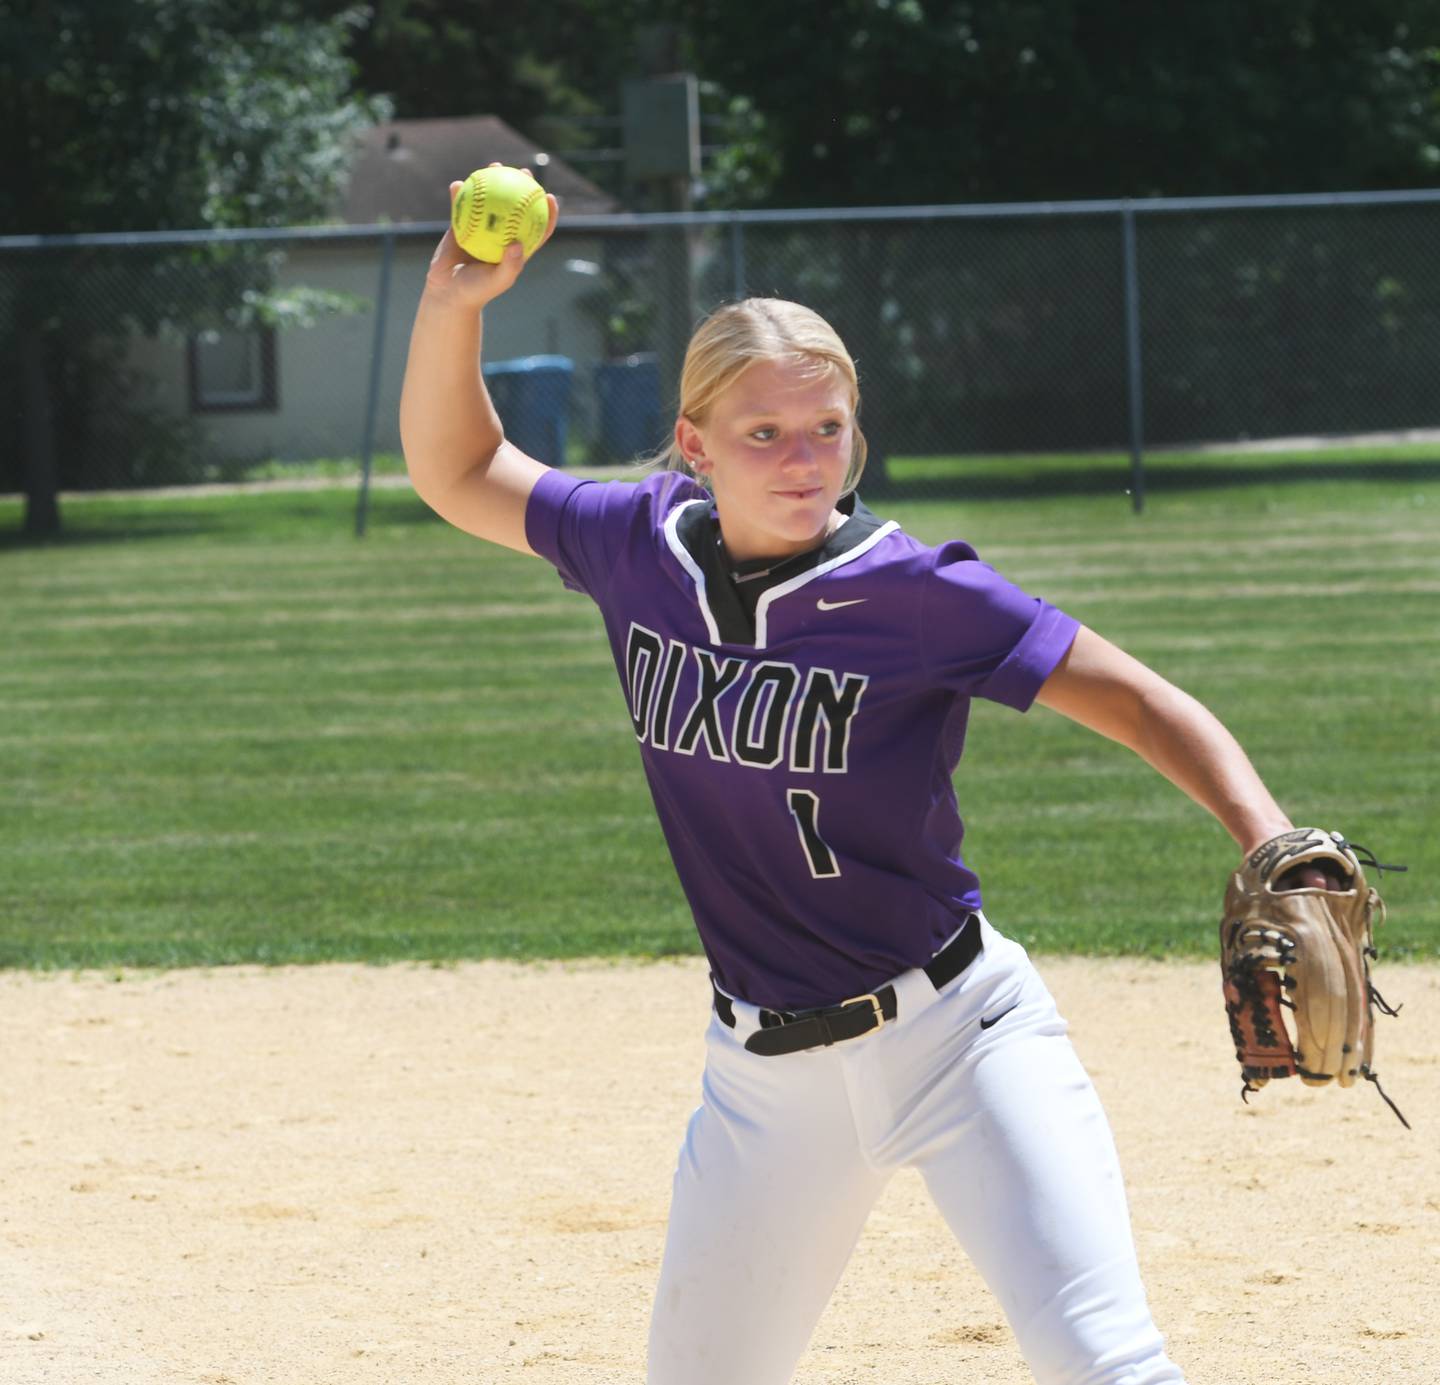 Dixon's Sam Tourtillott is the 2022 Sauk Valley Media Softball Player of the Year after breaking six school records and leading the Duchesses to a record-tying 18 wins this spring.